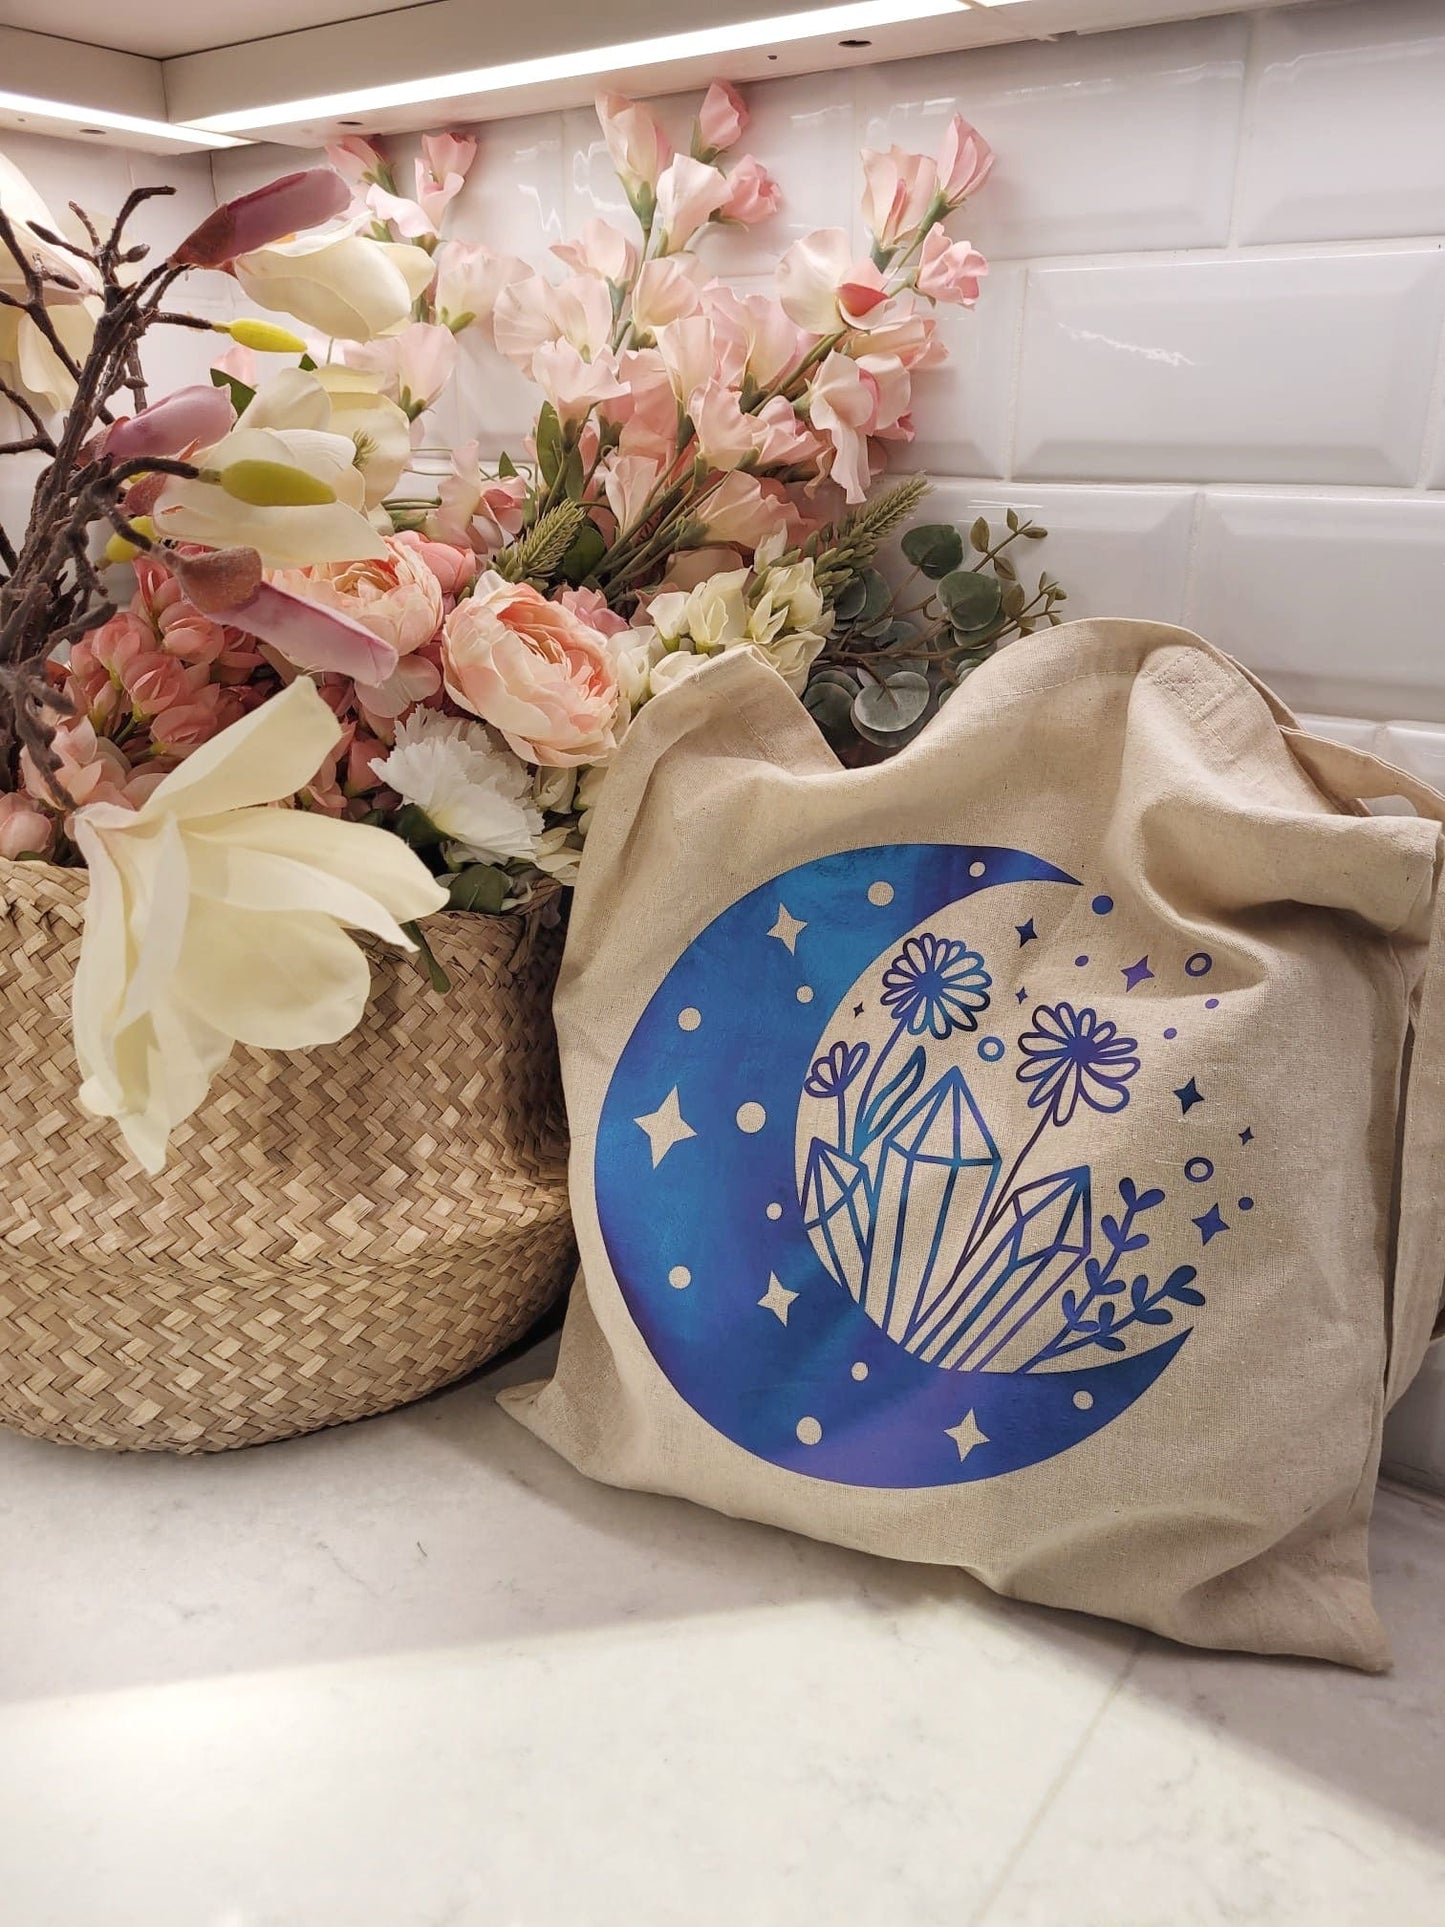 Spiritual Floral Moon Gemstone Calico Tote Bag - "Manifest"-Shopping Totes-Thecustomisedcollective-Holographic Blue-Thecustomisedcollective